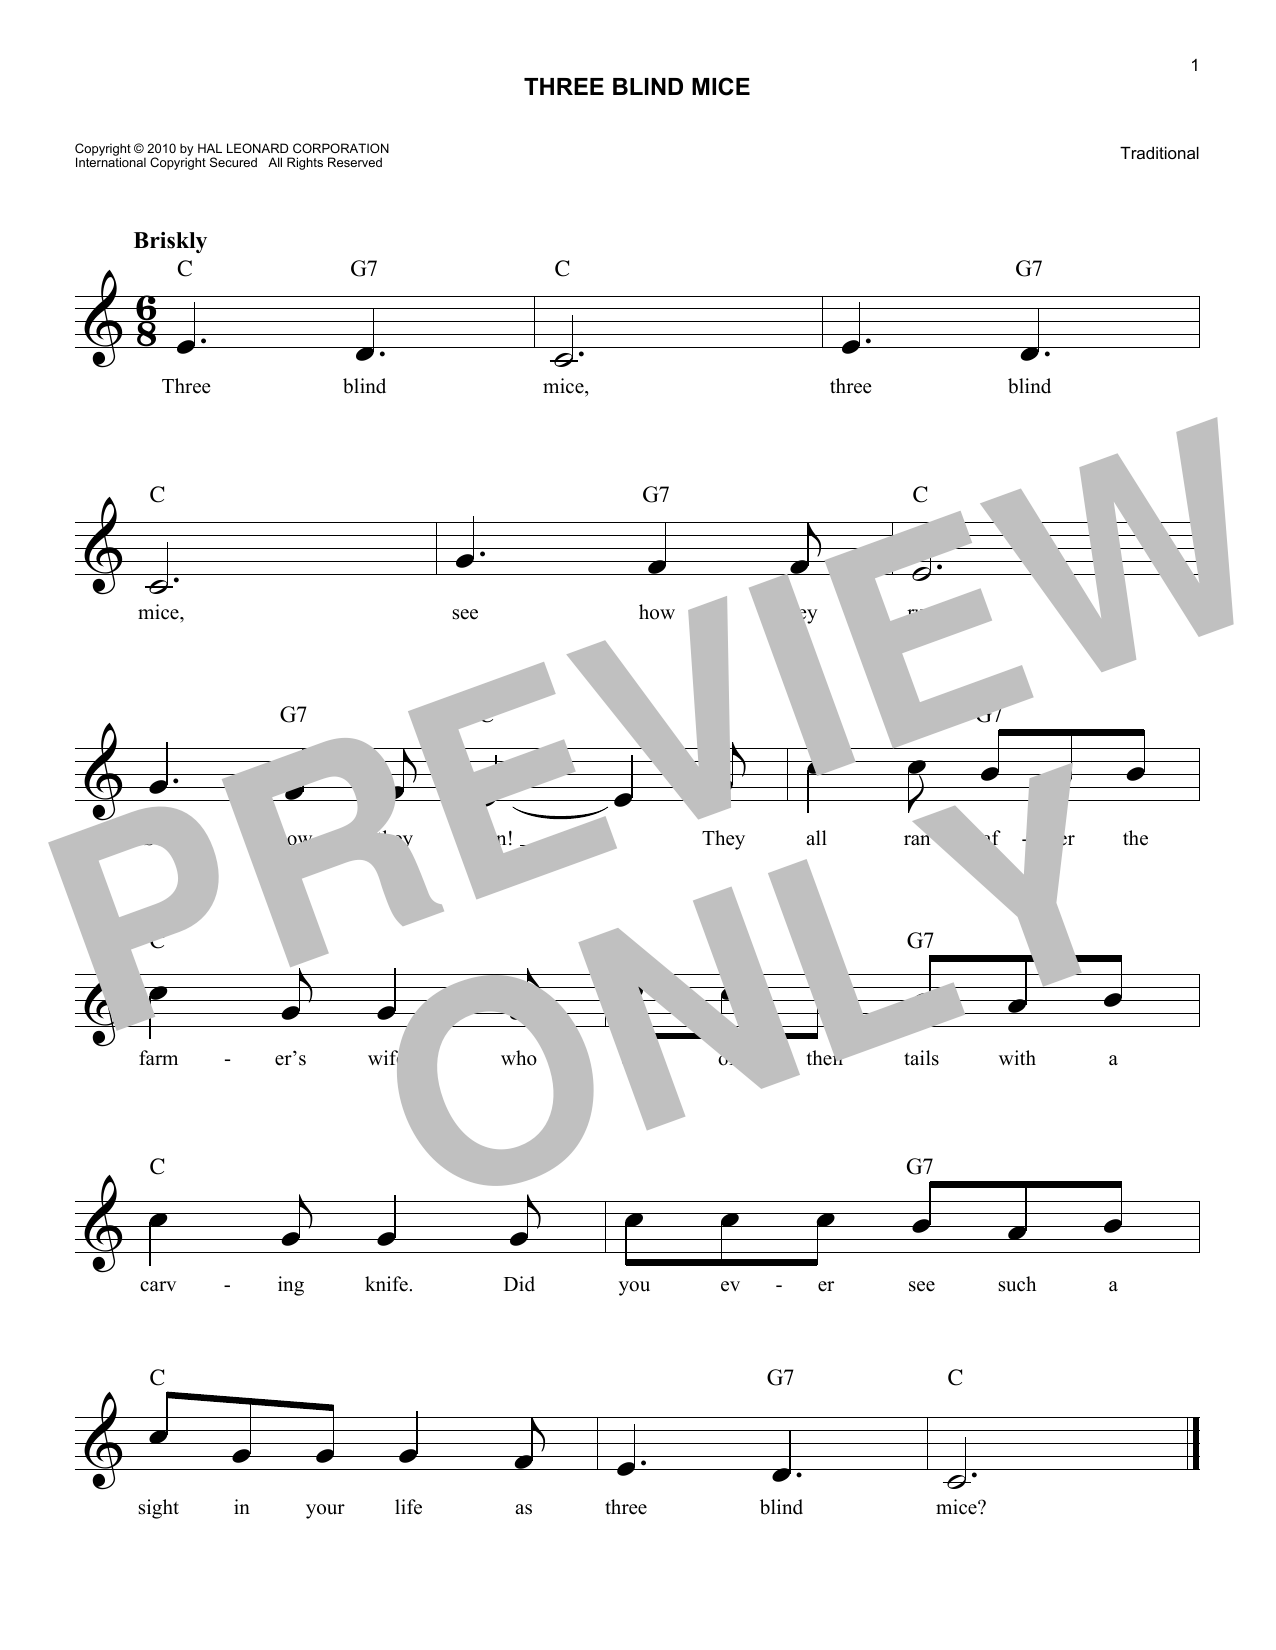 Download Traditional Three Blind Mice Sheet Music